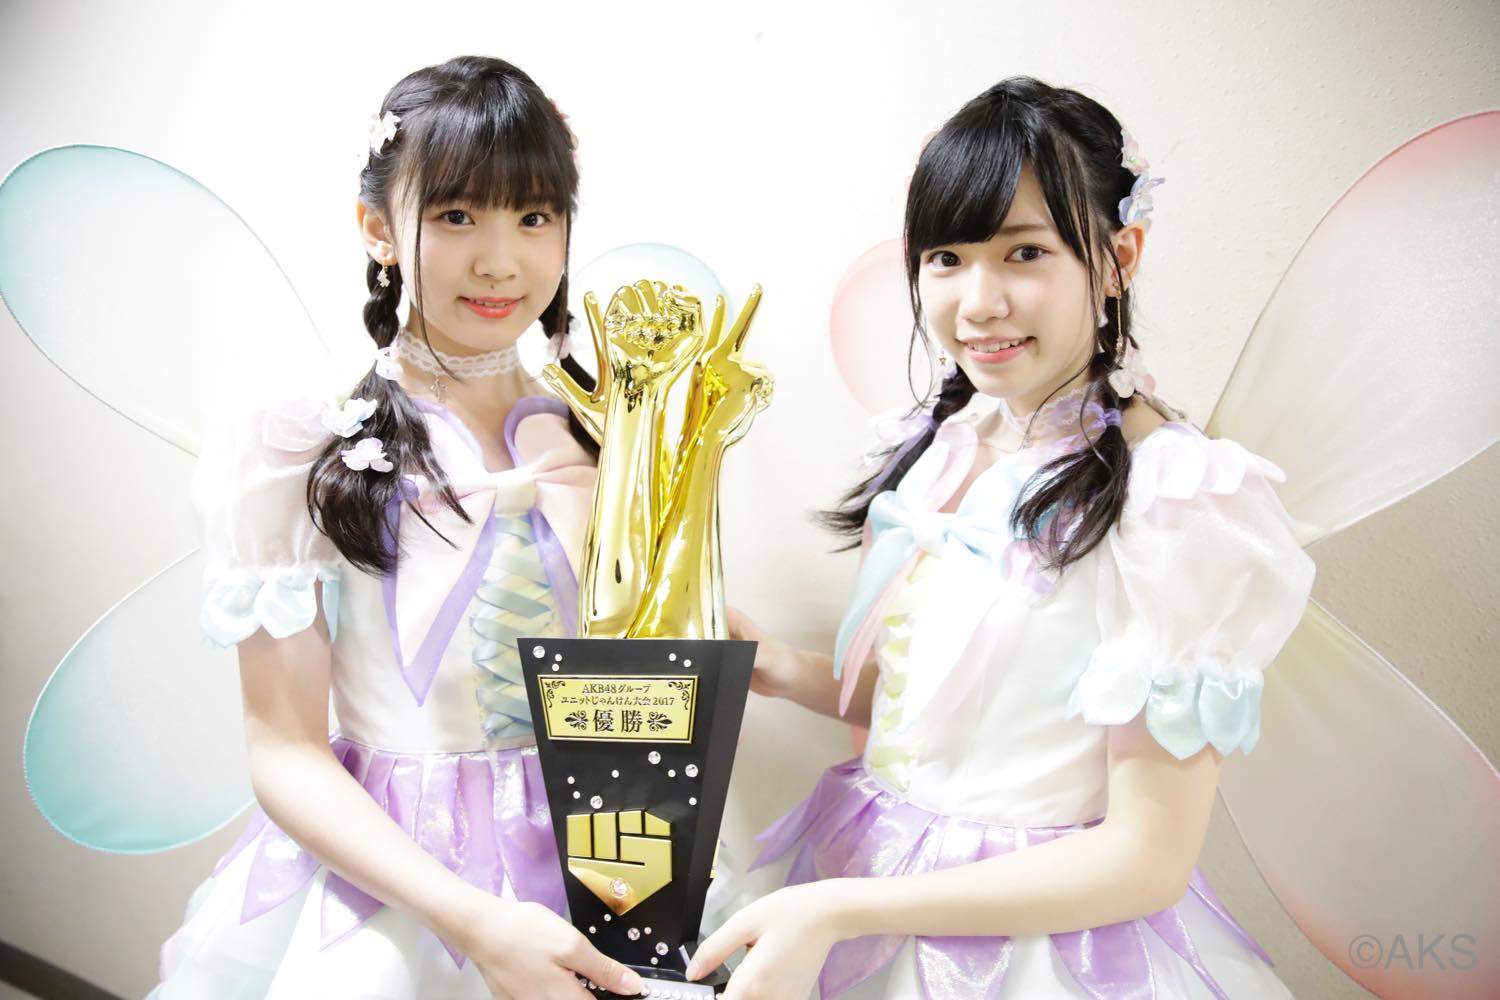 fairy w!nk From HKT48 is Victorious in the 2017 AKB48 Janken Tournament!